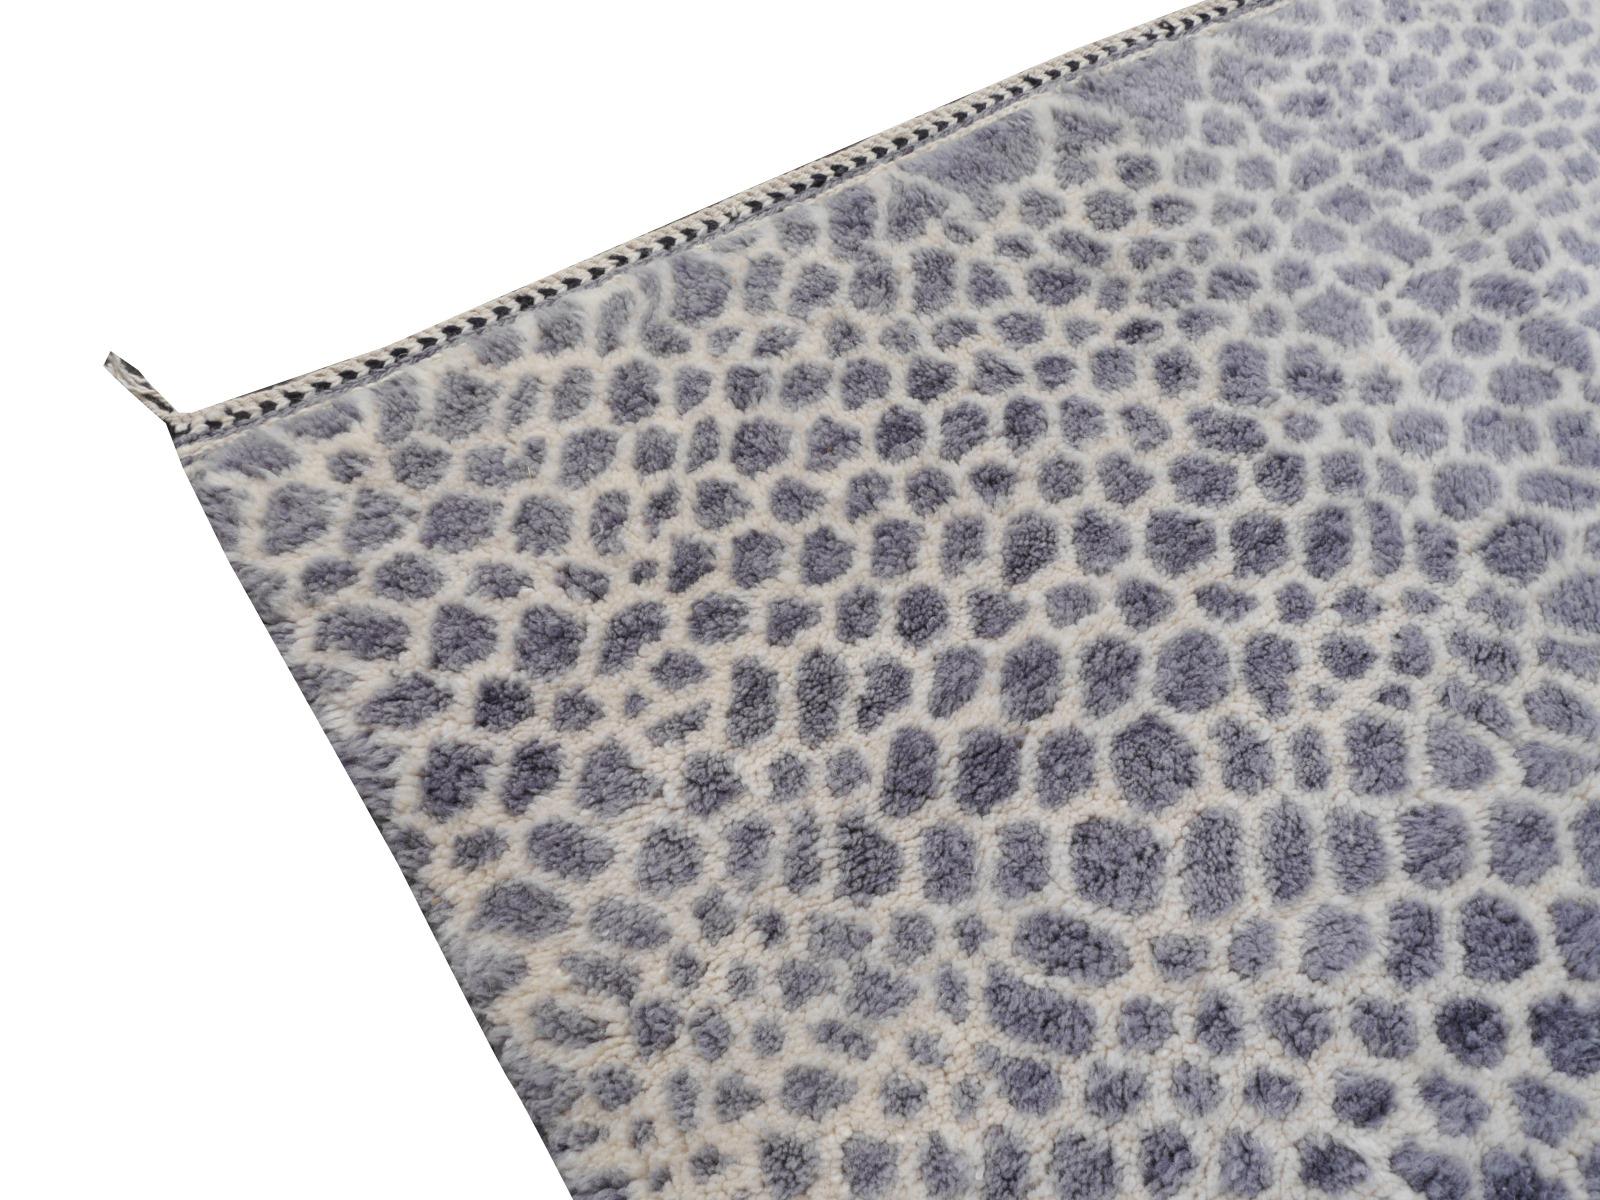 North African Moroccan Berber Rug Leopard Cheetah Design Soft Quality Gray Beige For Sale 3